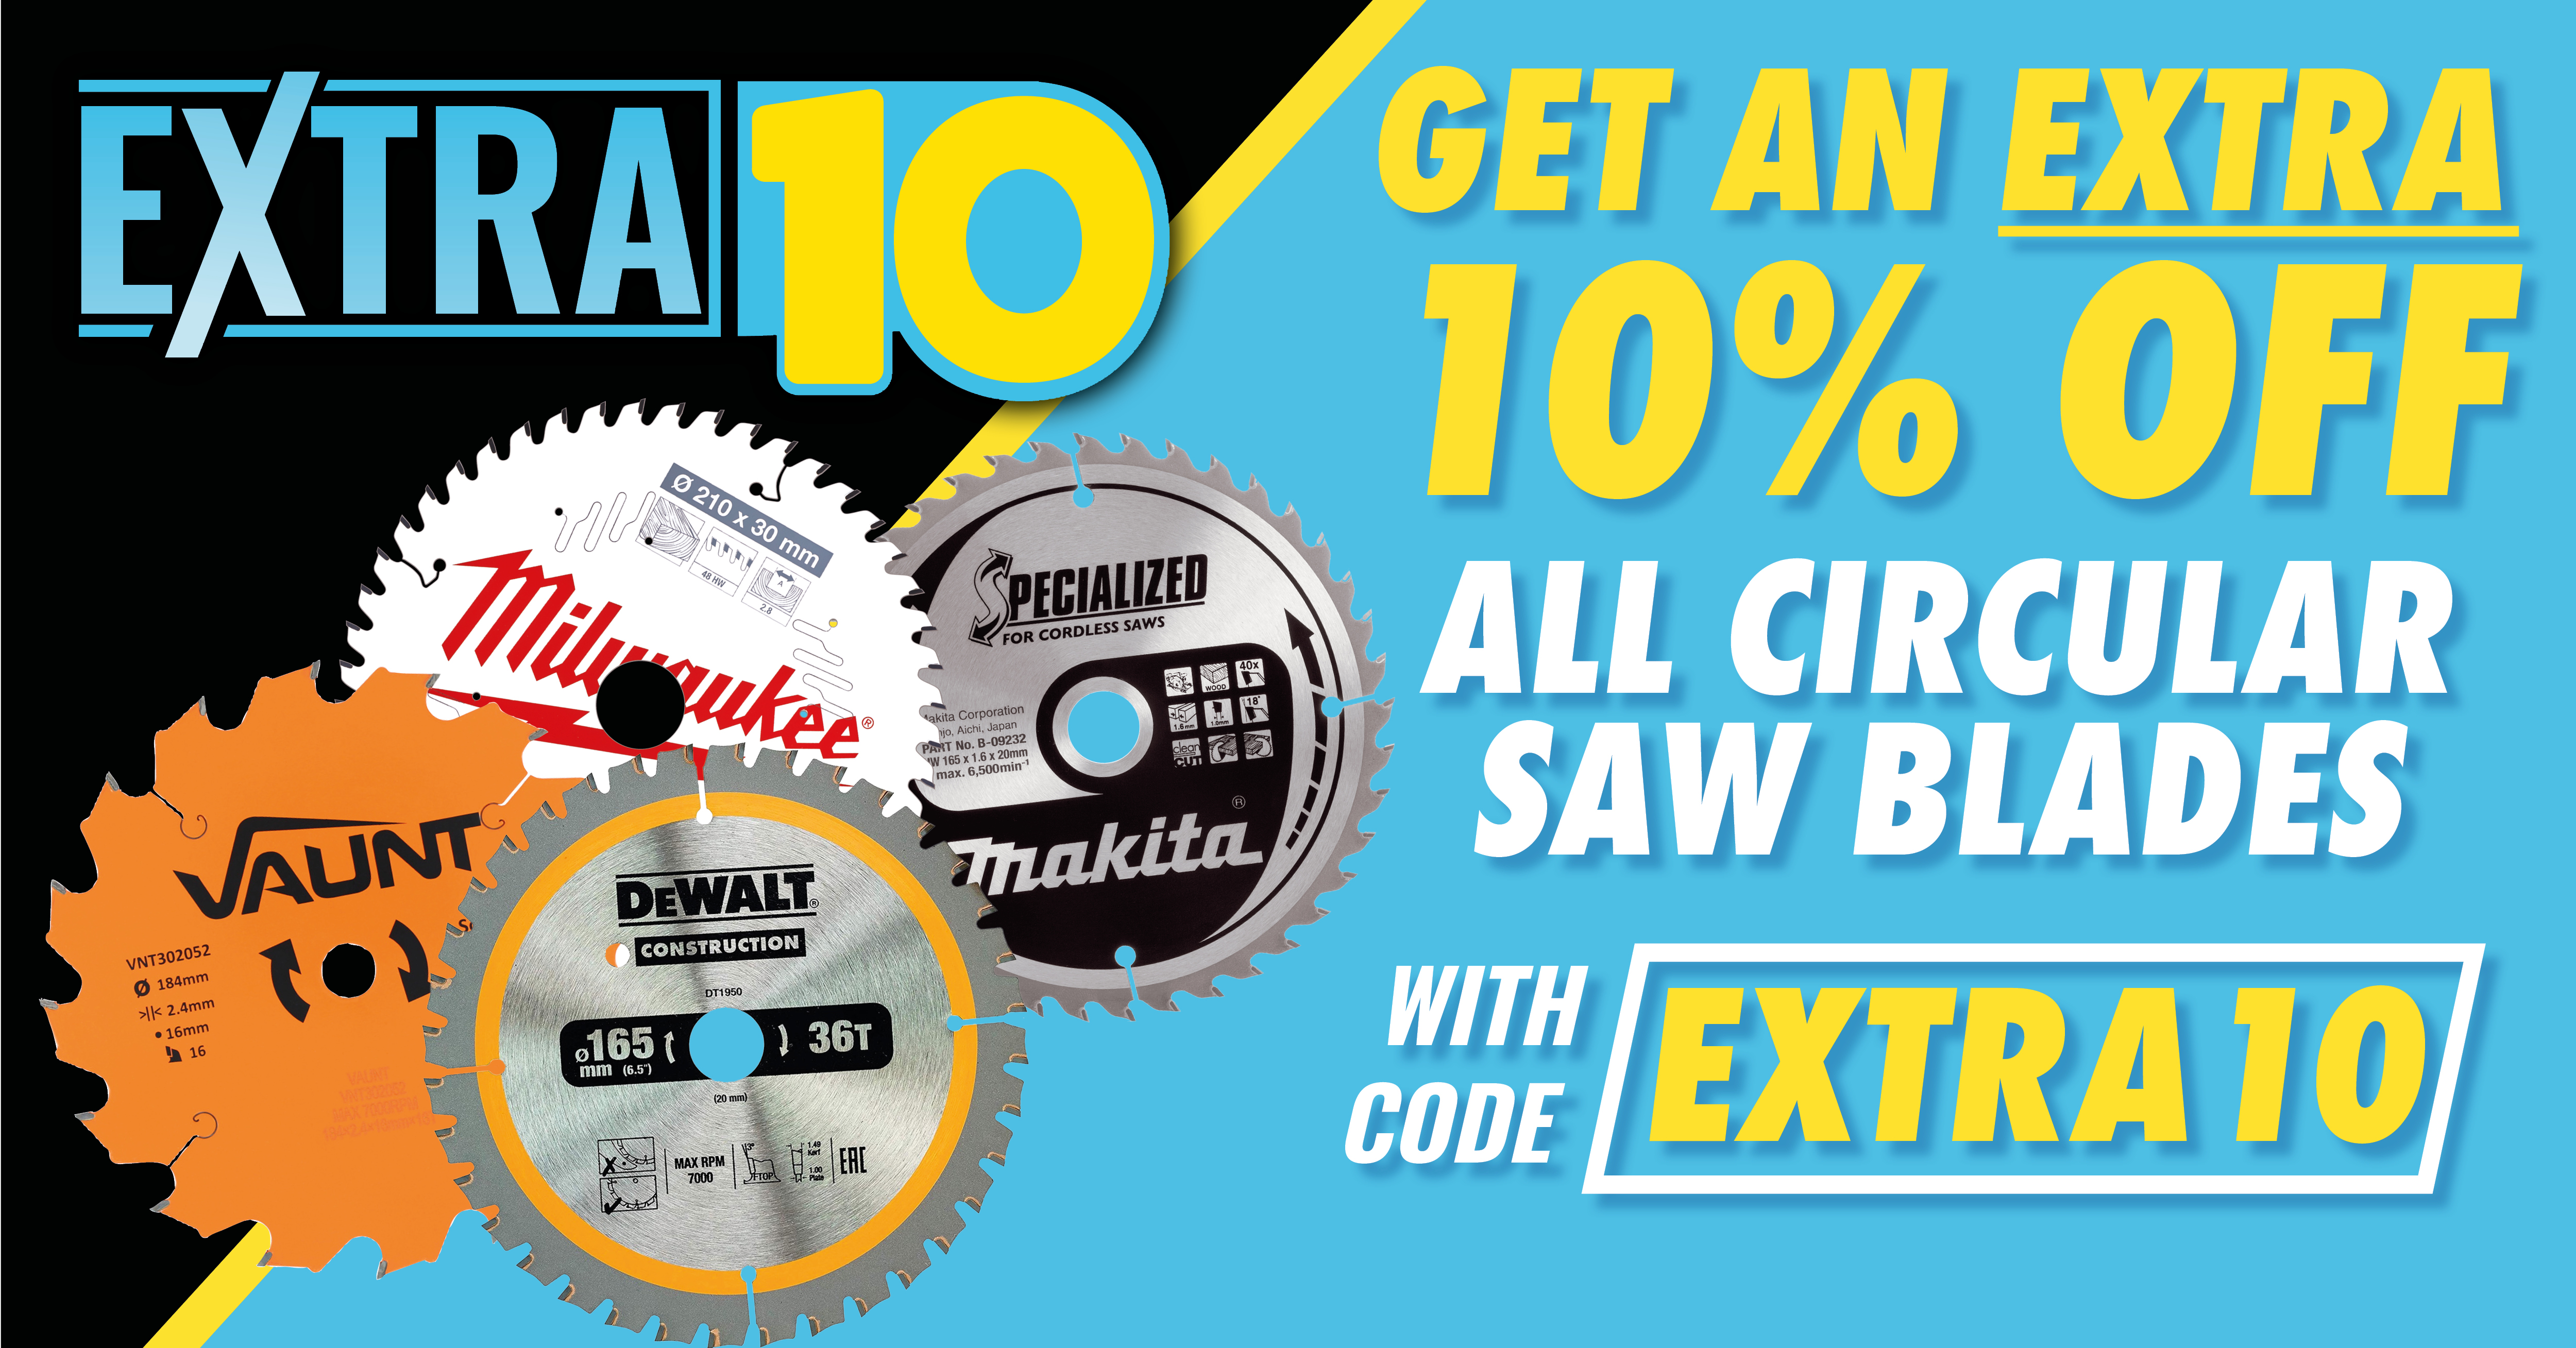 Extra 10% off on Saw Blades